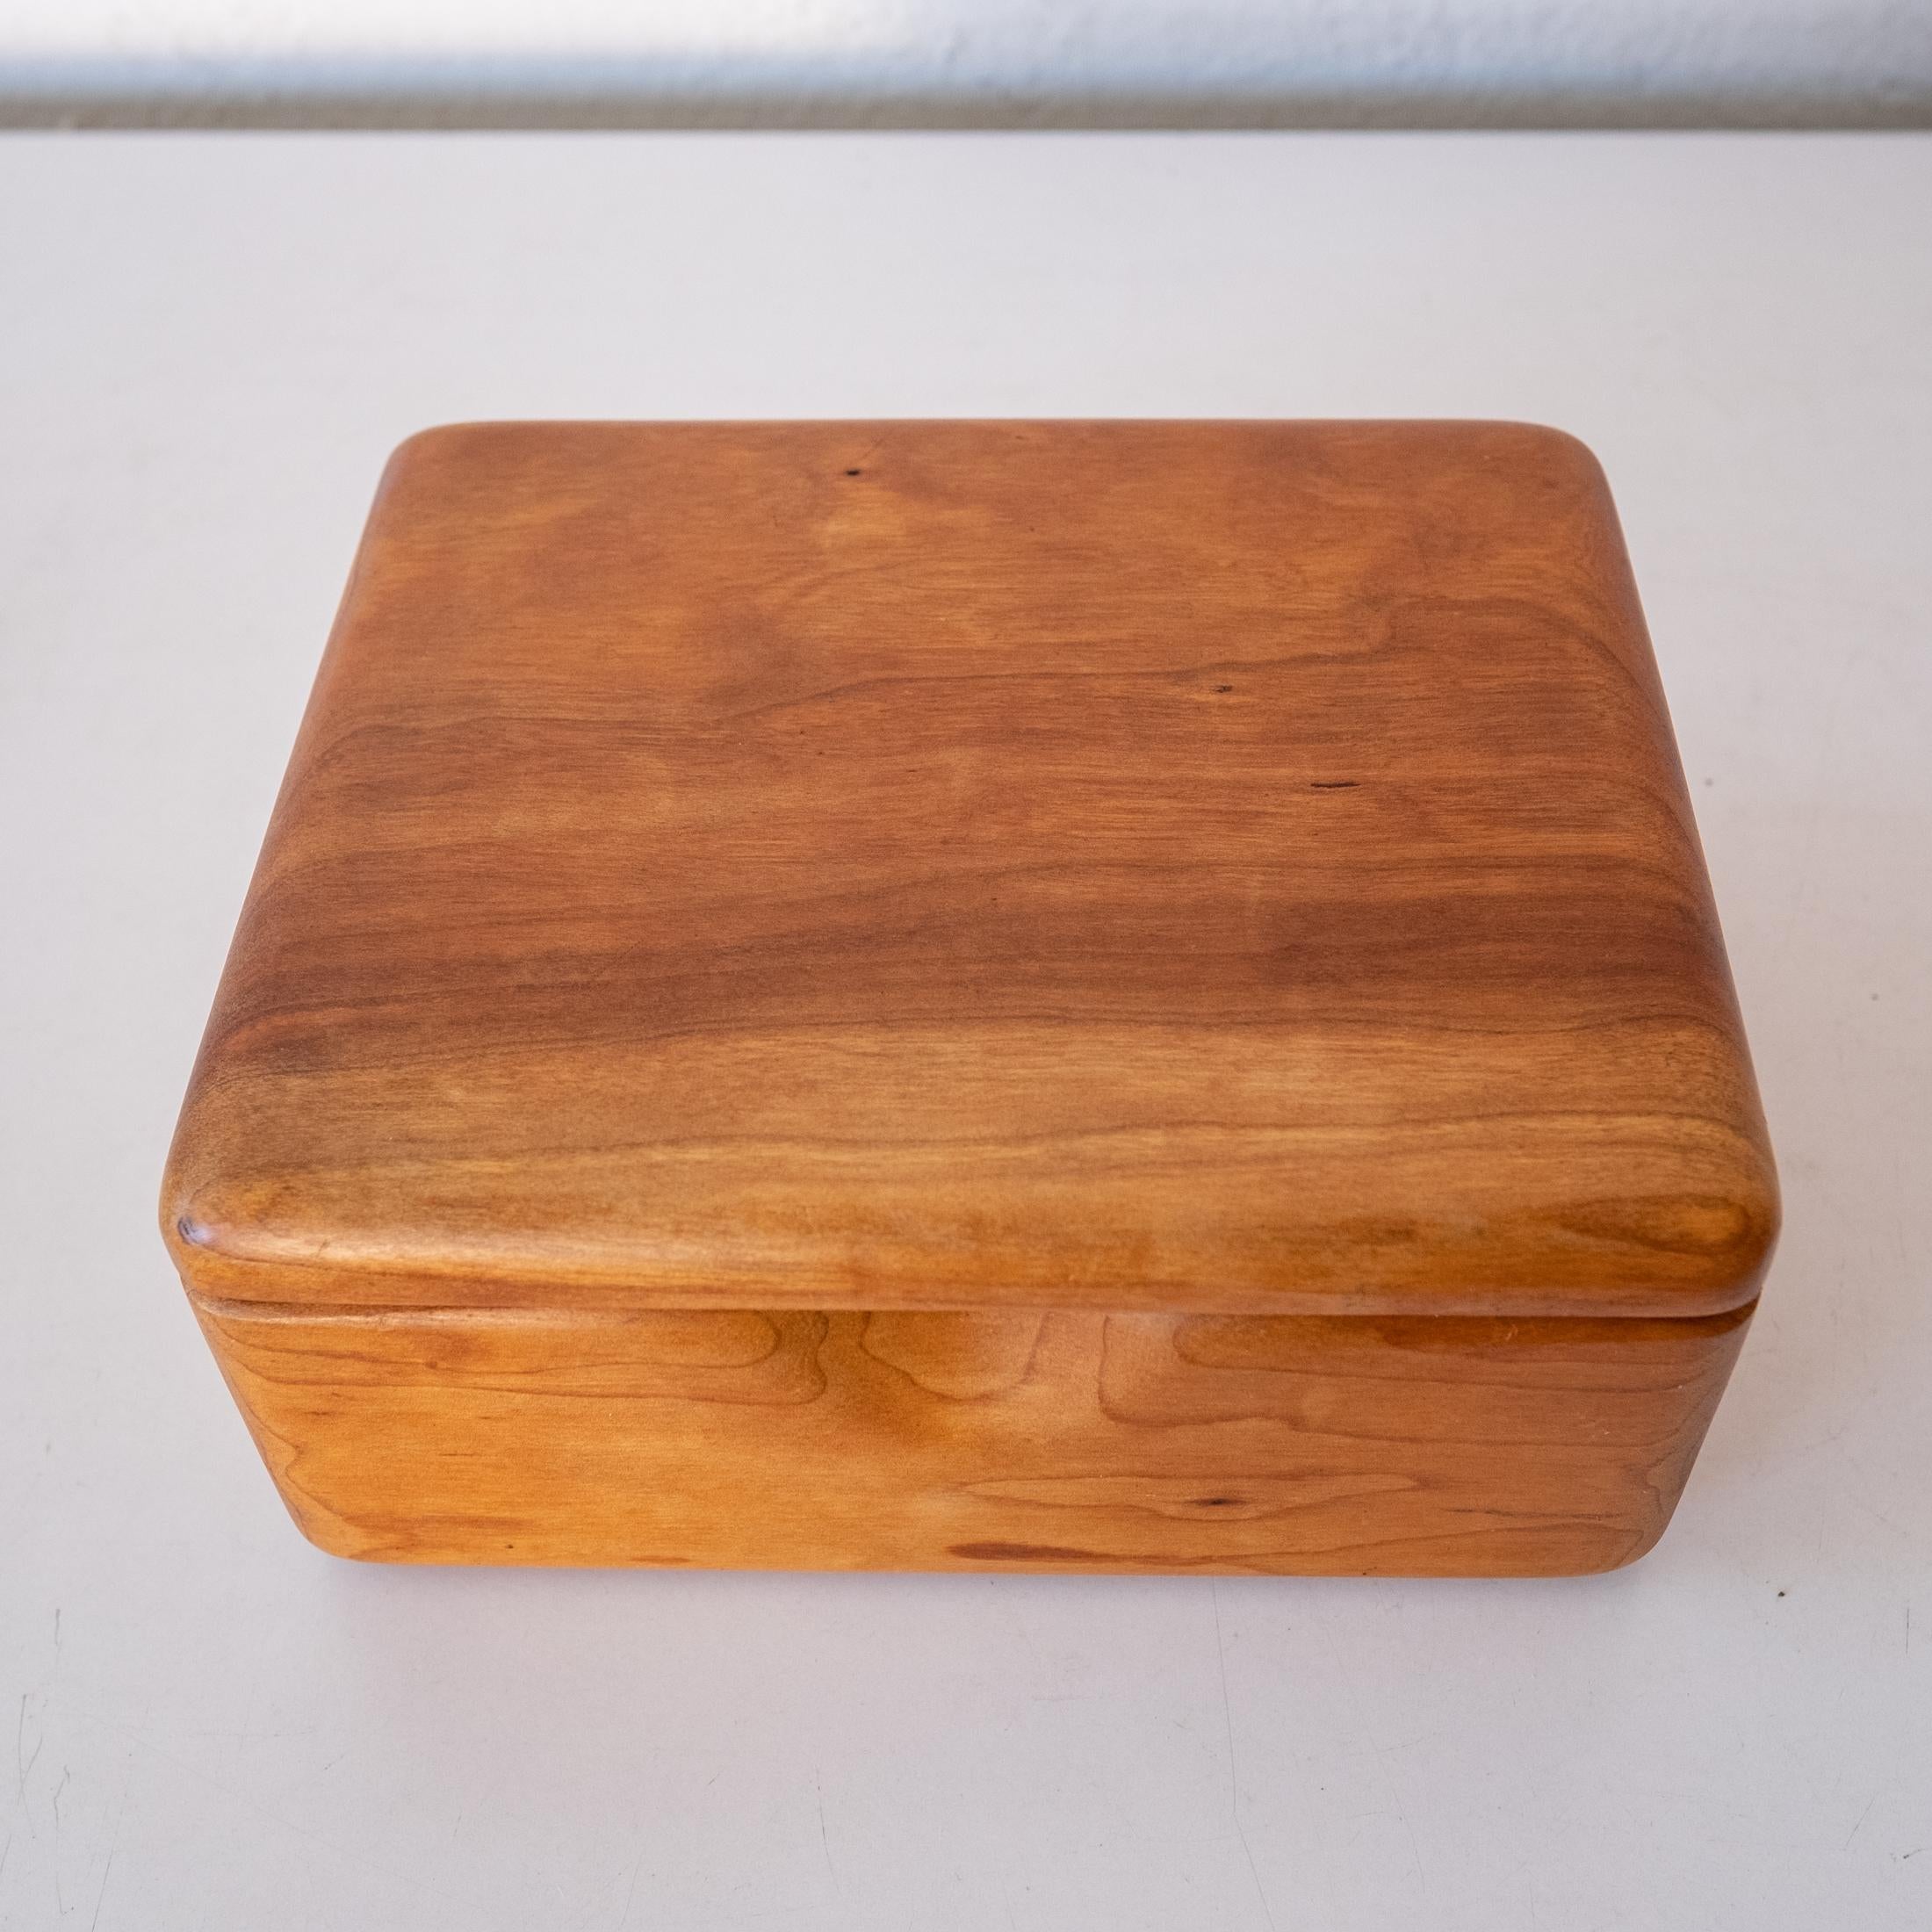 Studio Handcrafted Wood Jewelry Box 1970s For Sale 6